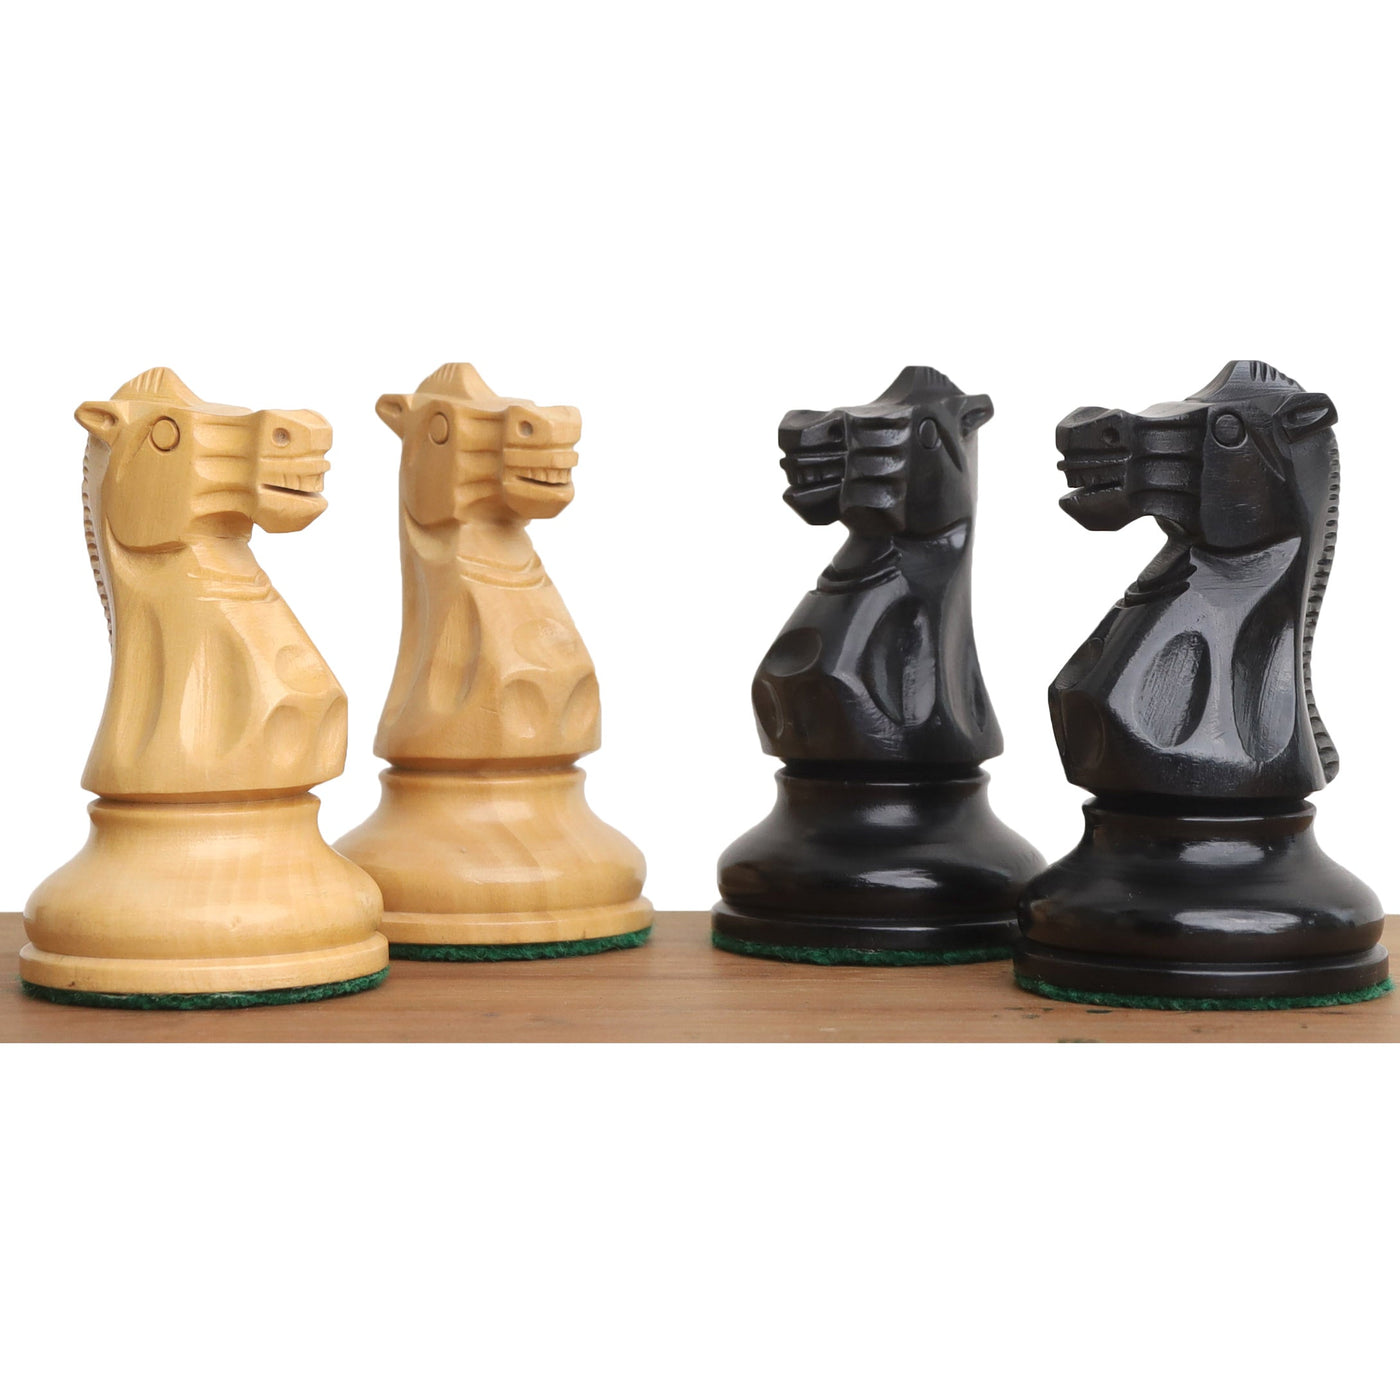 Slightly Imperfect 4.1" New Classic Staunton Wooden Chess Pieces Only Set-Weighted Ebonised Boxwood